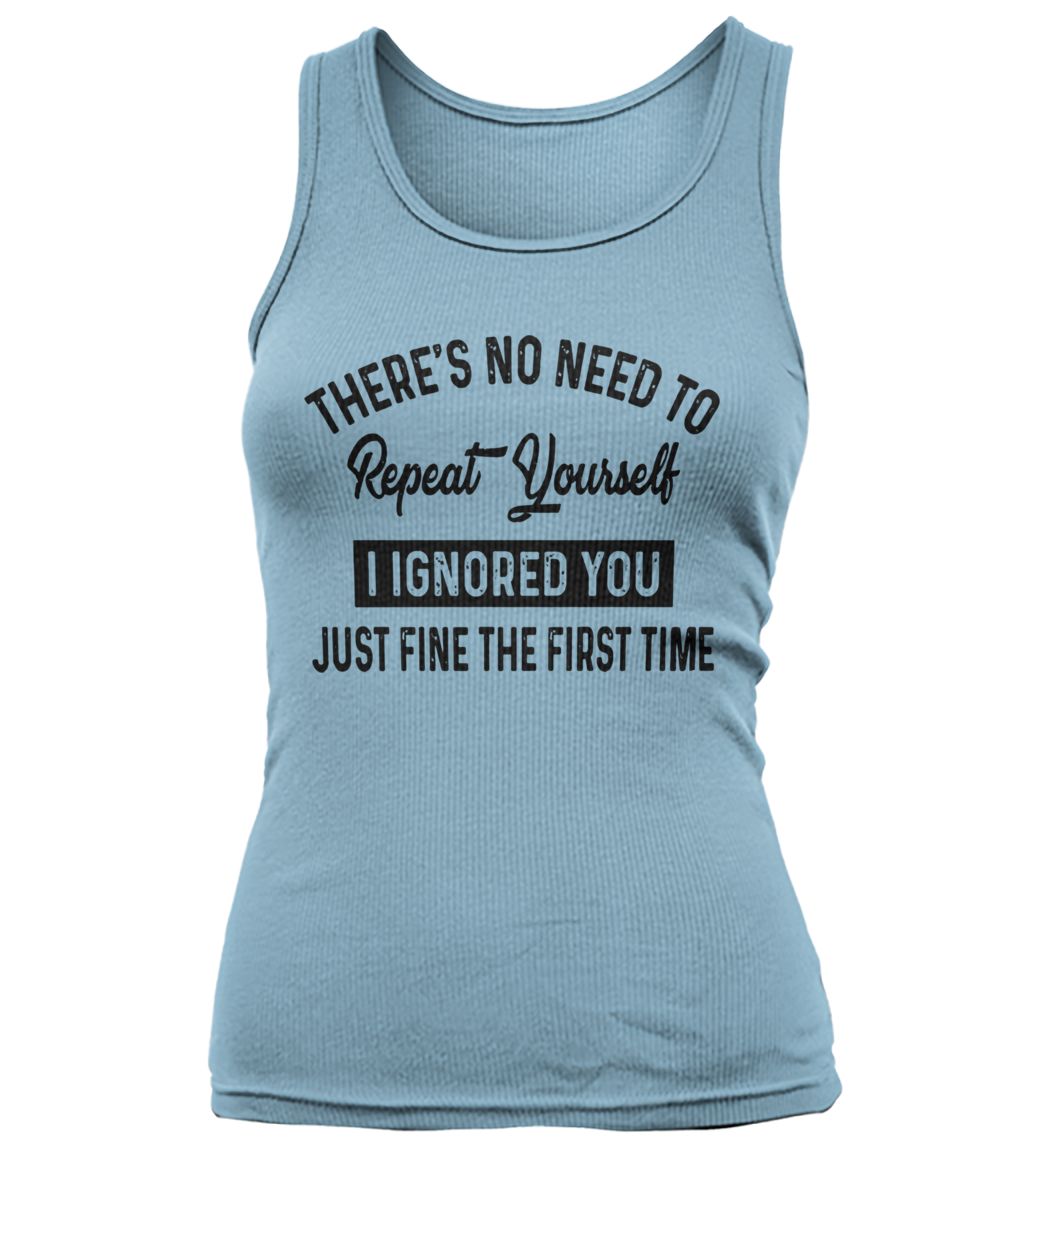 There’s no need to repeat yourself I ignored you just fine the first time women's tank top